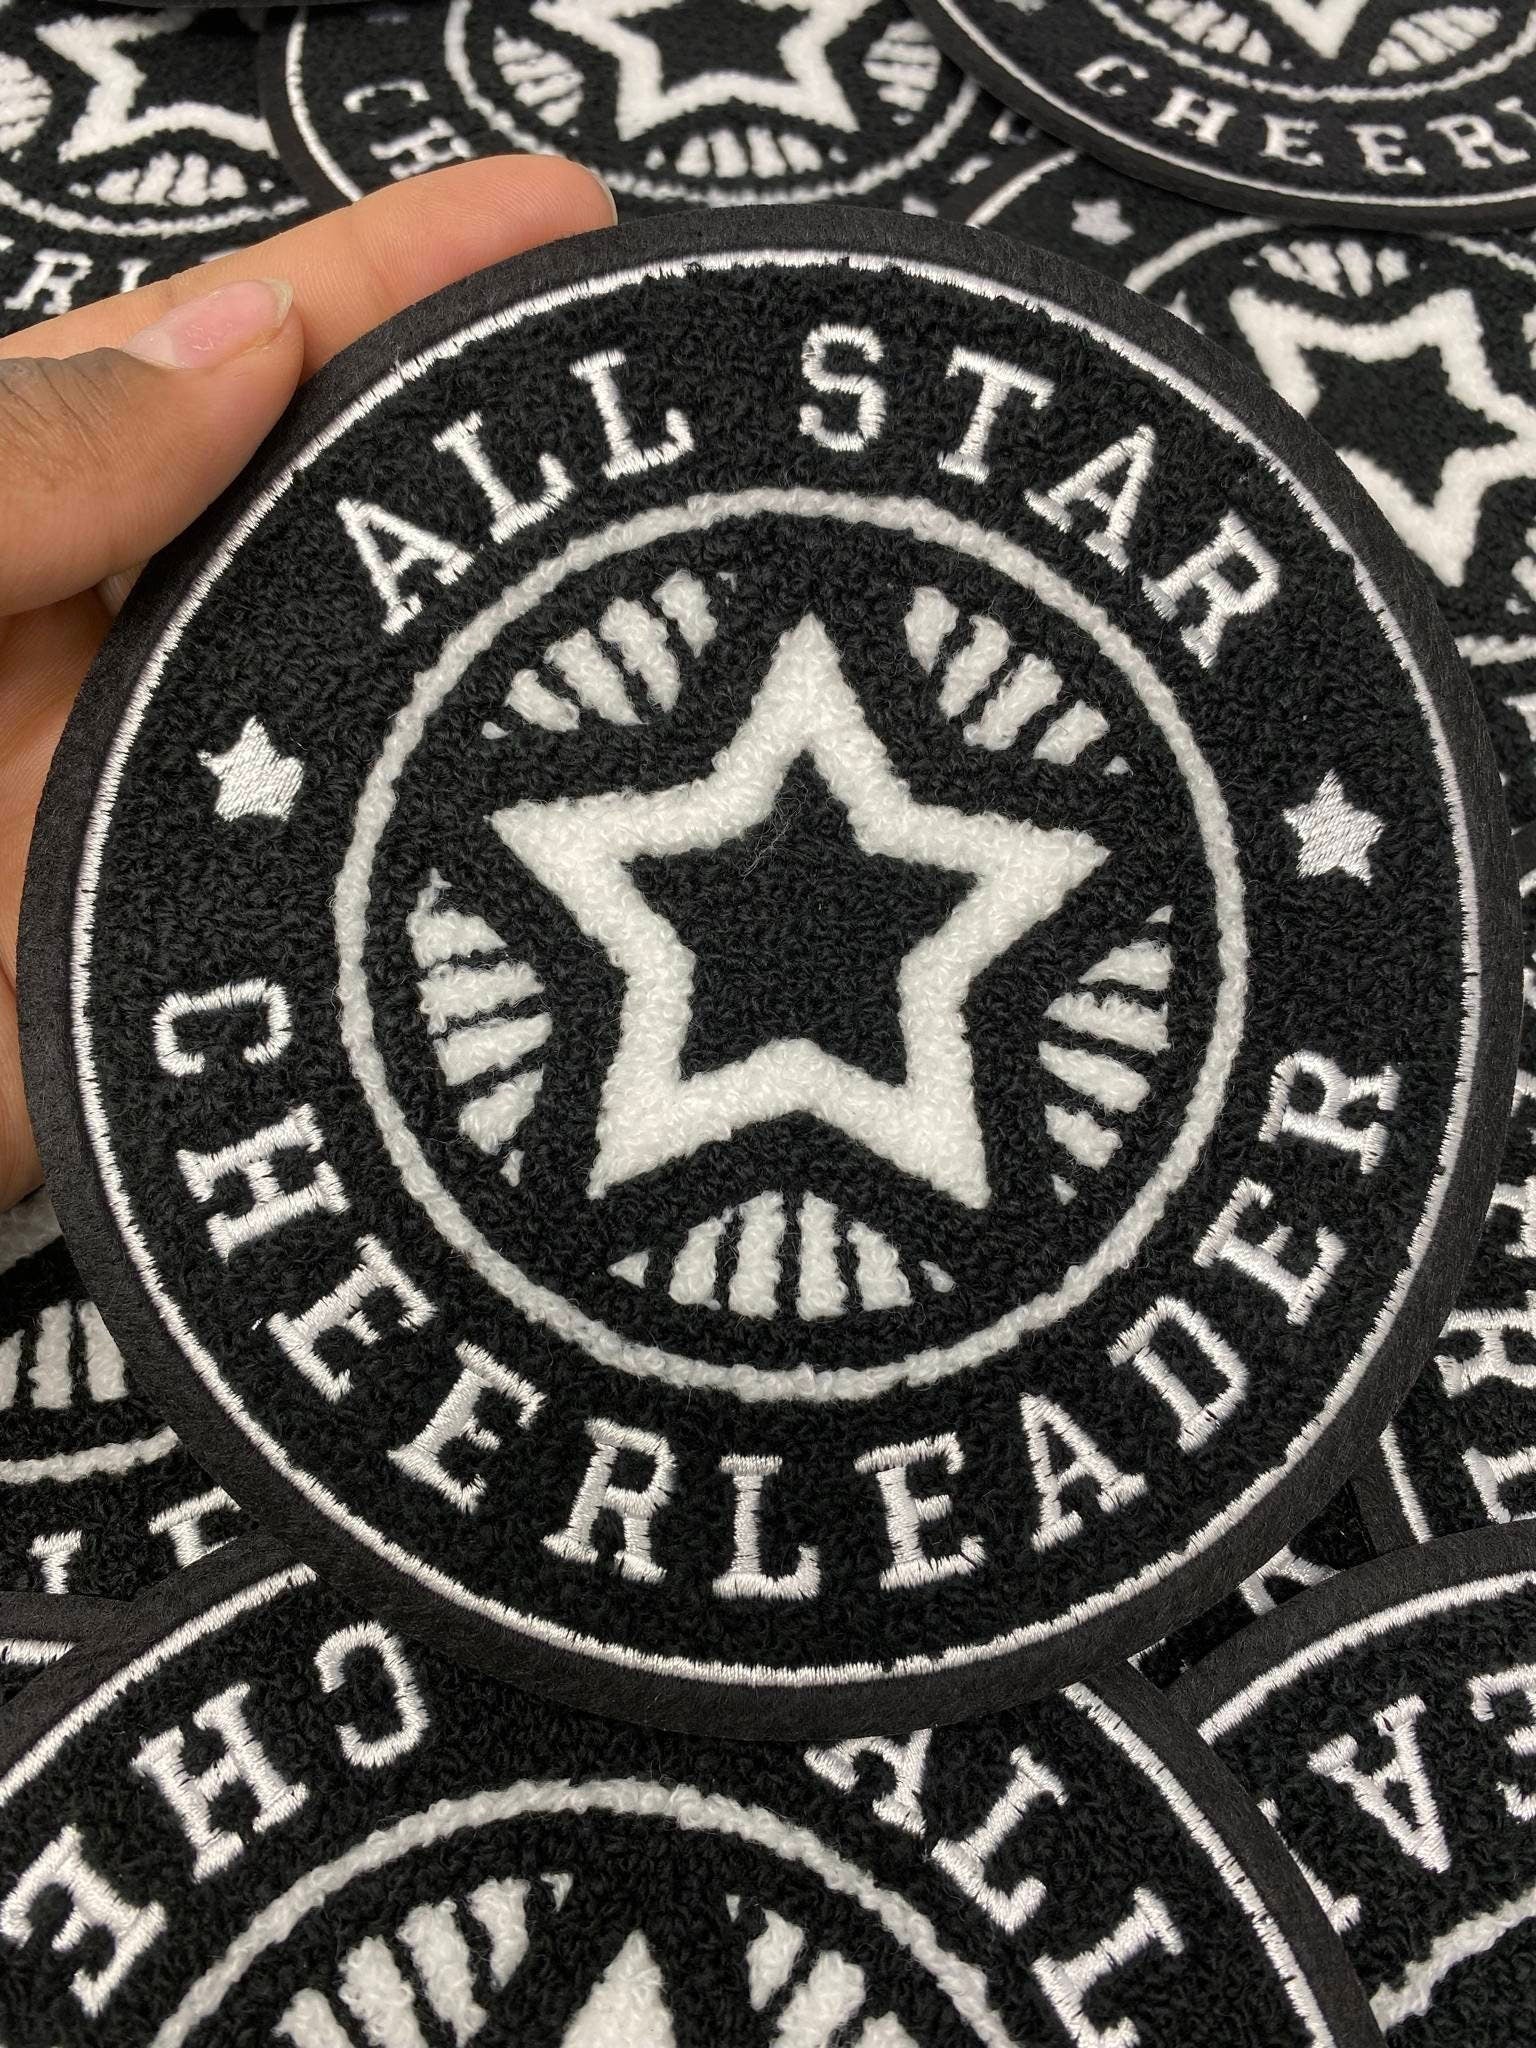 Chenille, "All-Star Cheerleader" Black & White Varsity Patch, Iron-on Applique for Jackets, Camo, Bags, Accessories, and DIY, Cheer Gift